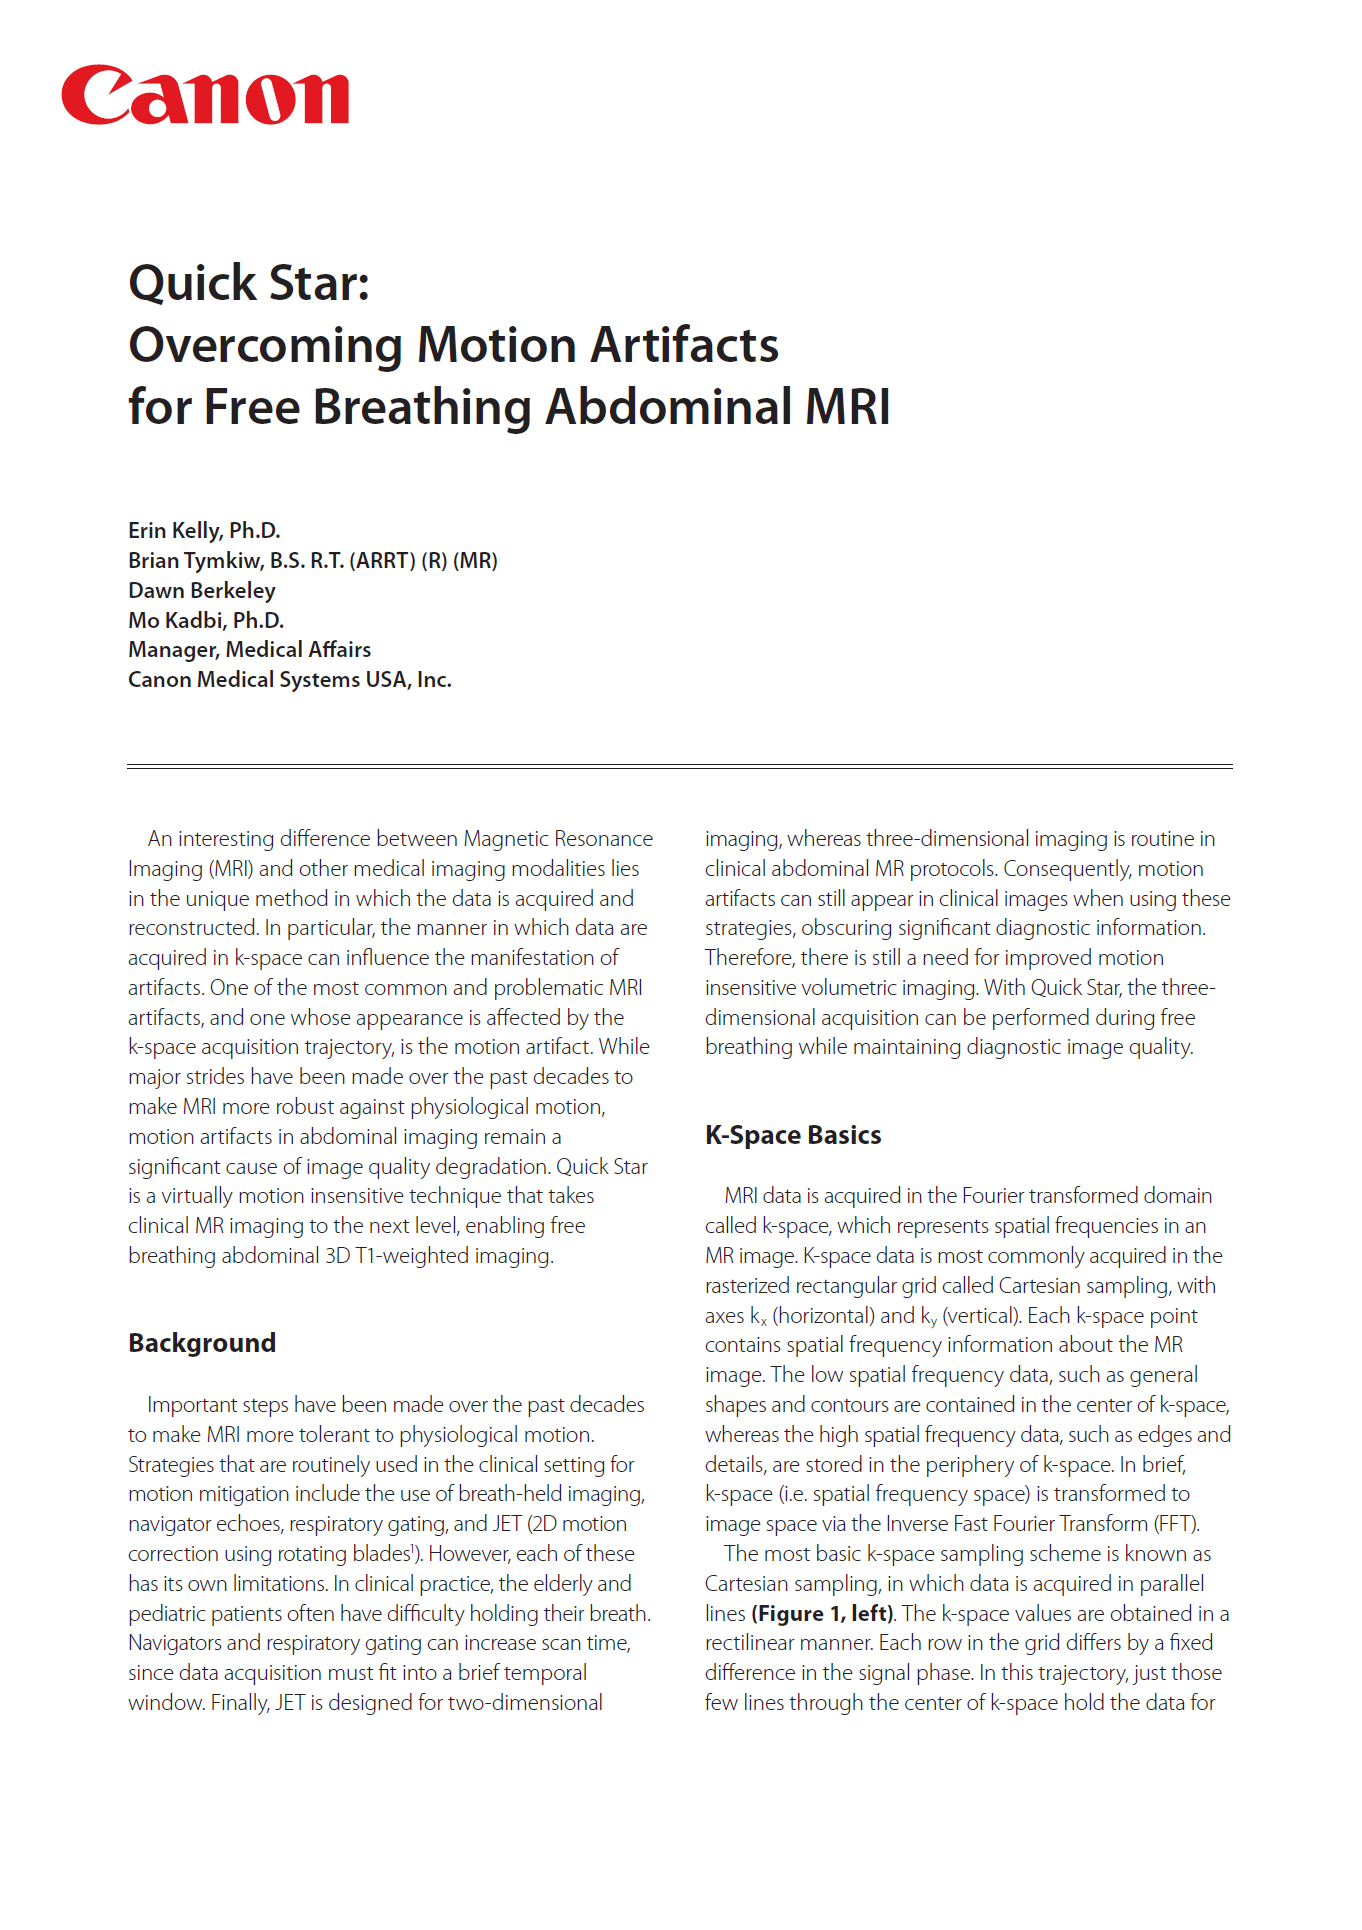 MR Quick Star: Overcoming Motion Artifacts for Free Breathing Abdominal MRI White Paper